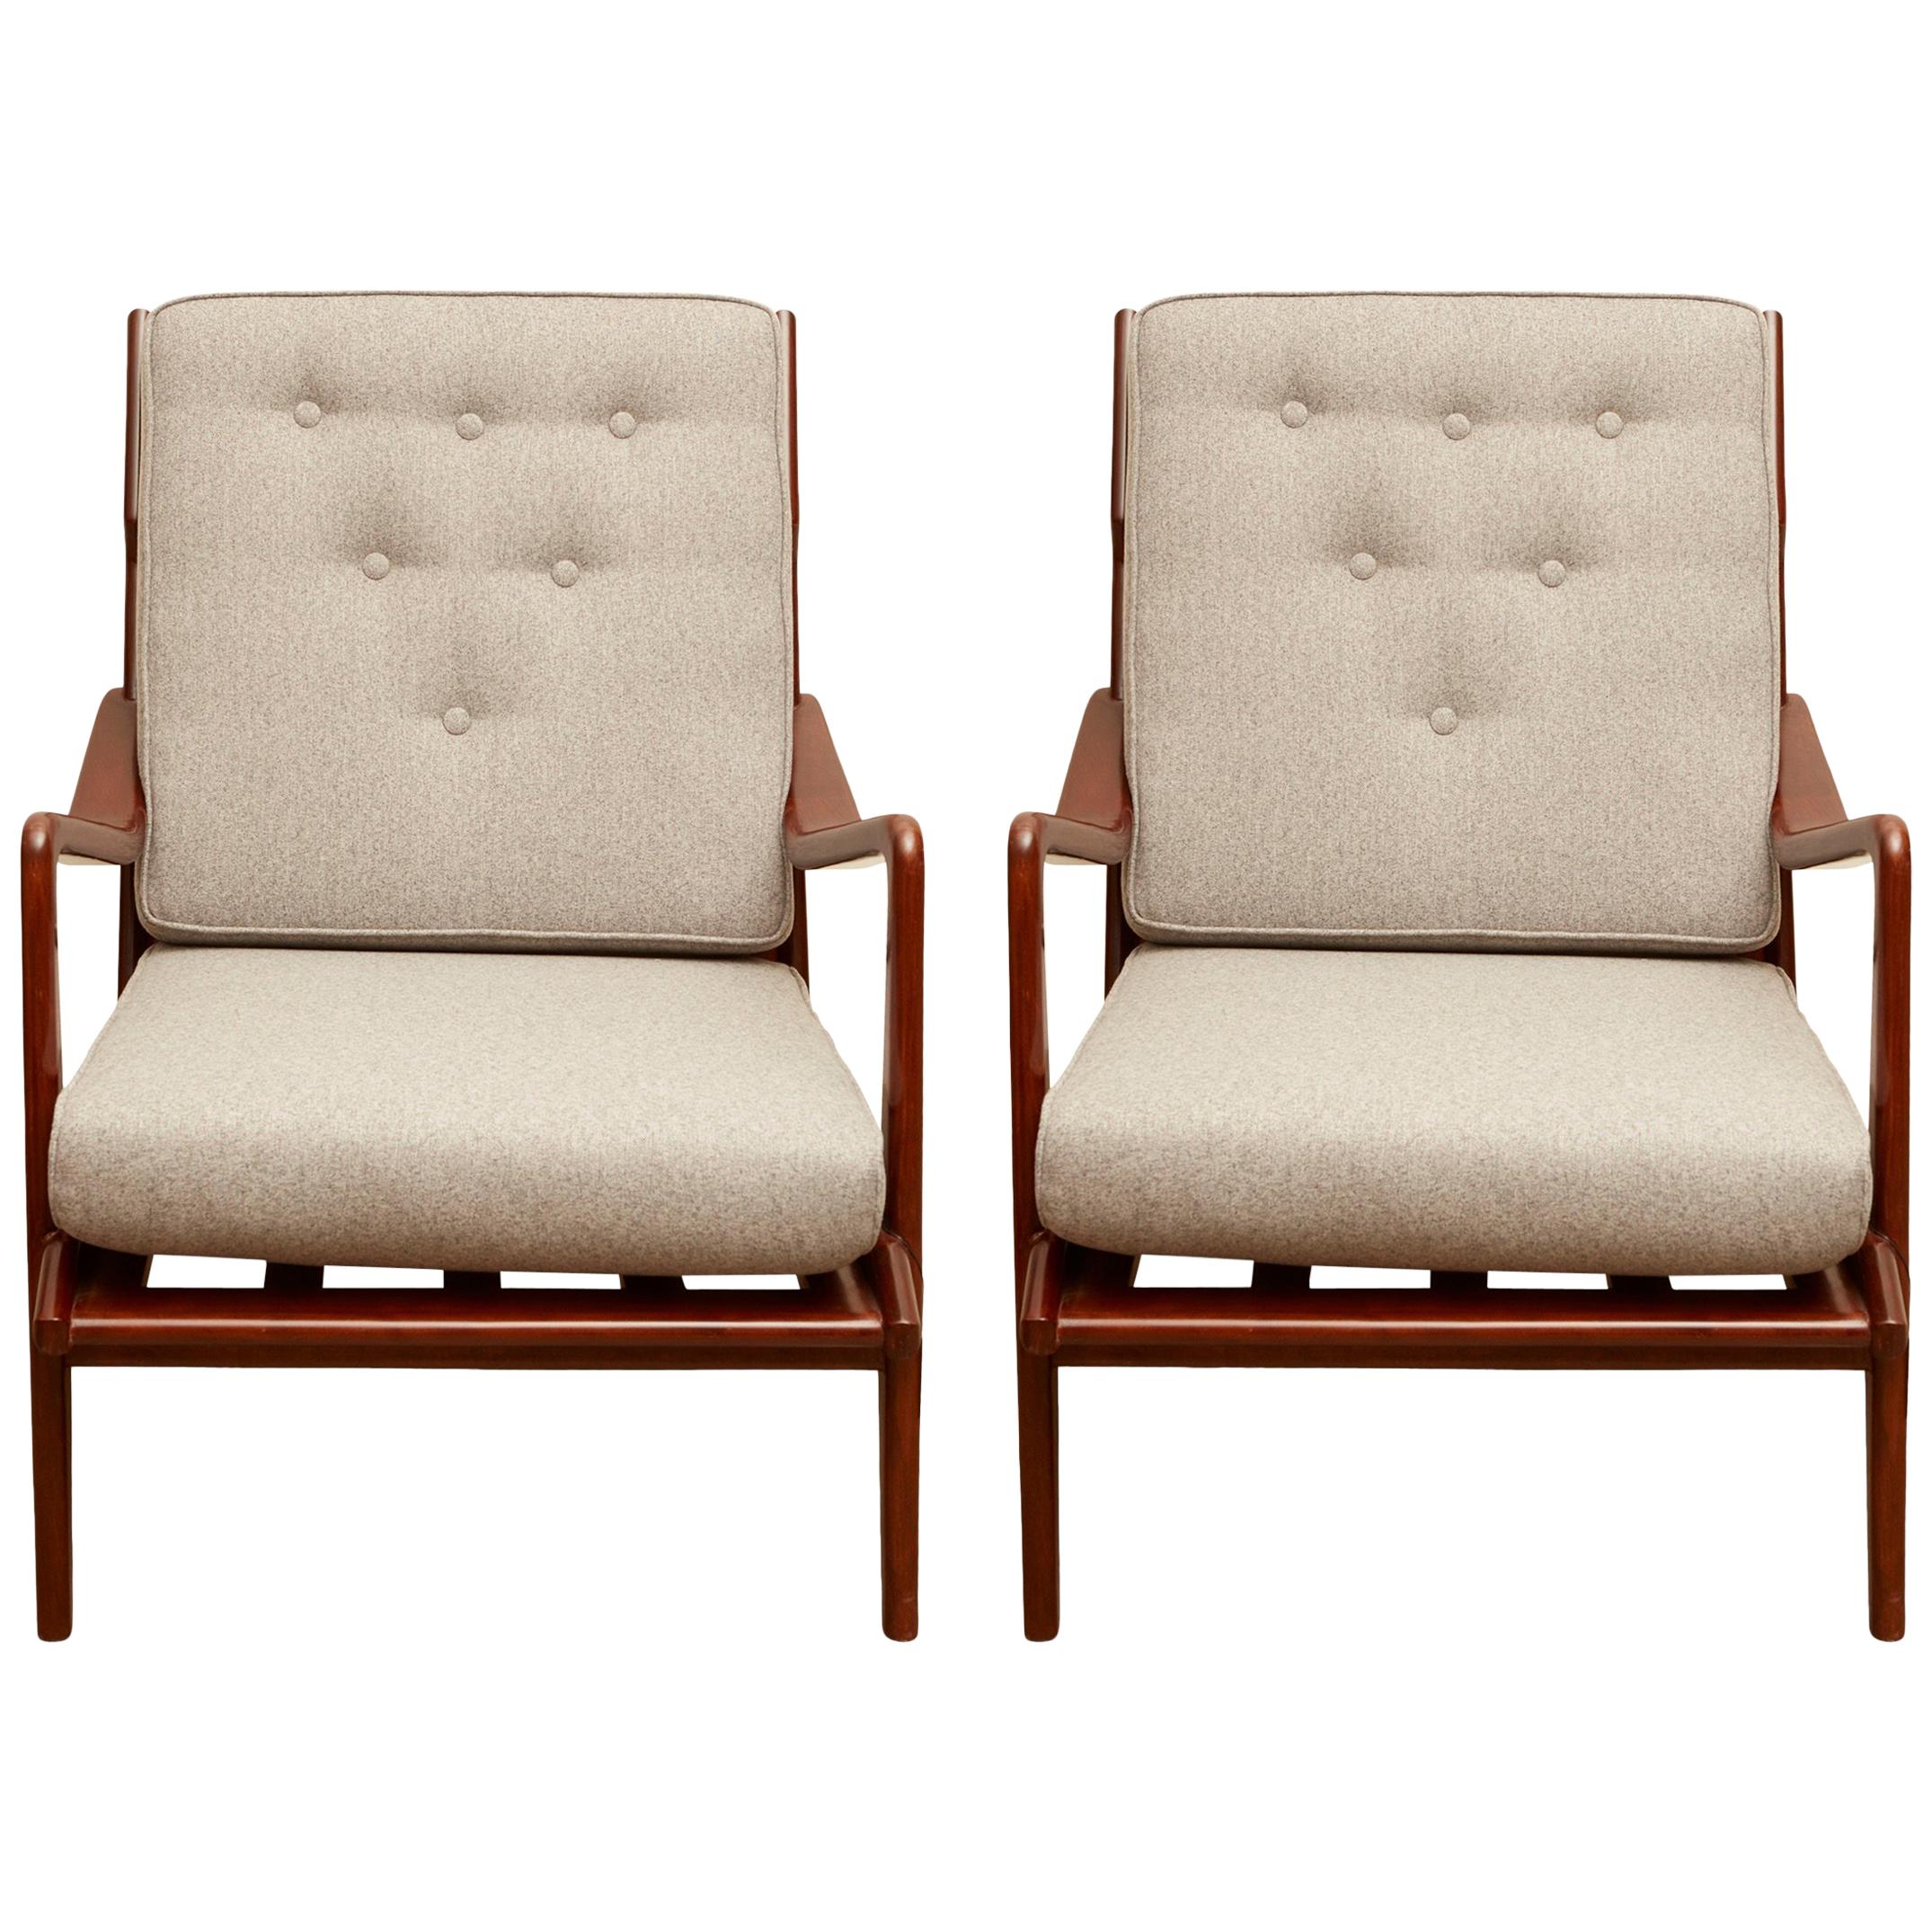 Pair of Vintage Italian Lounge Chairs